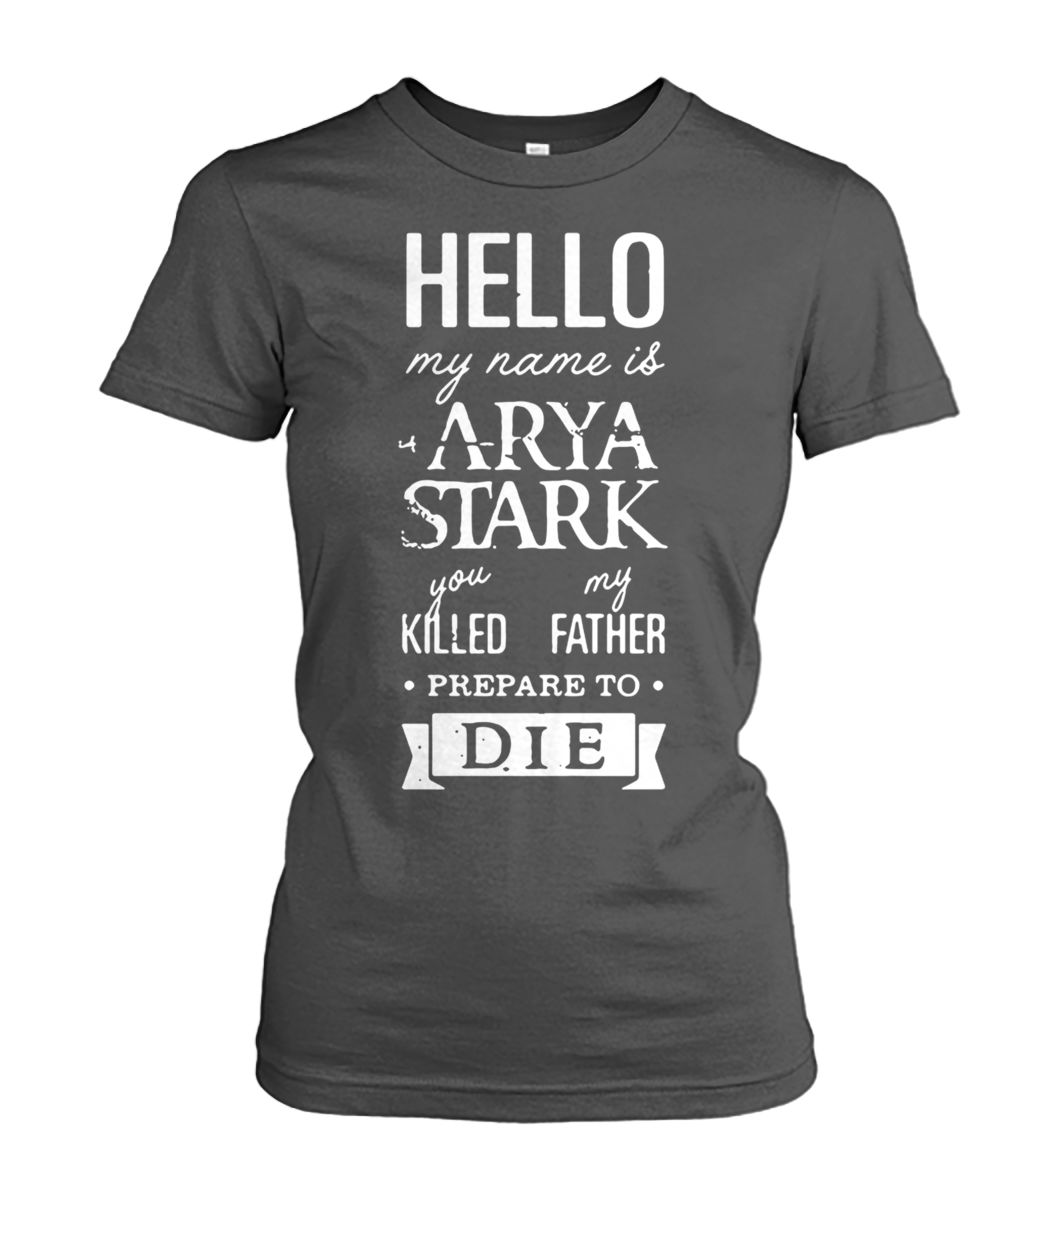 Hello my name is arya stark you killed my father prepare to die game of thrones women's crew tee